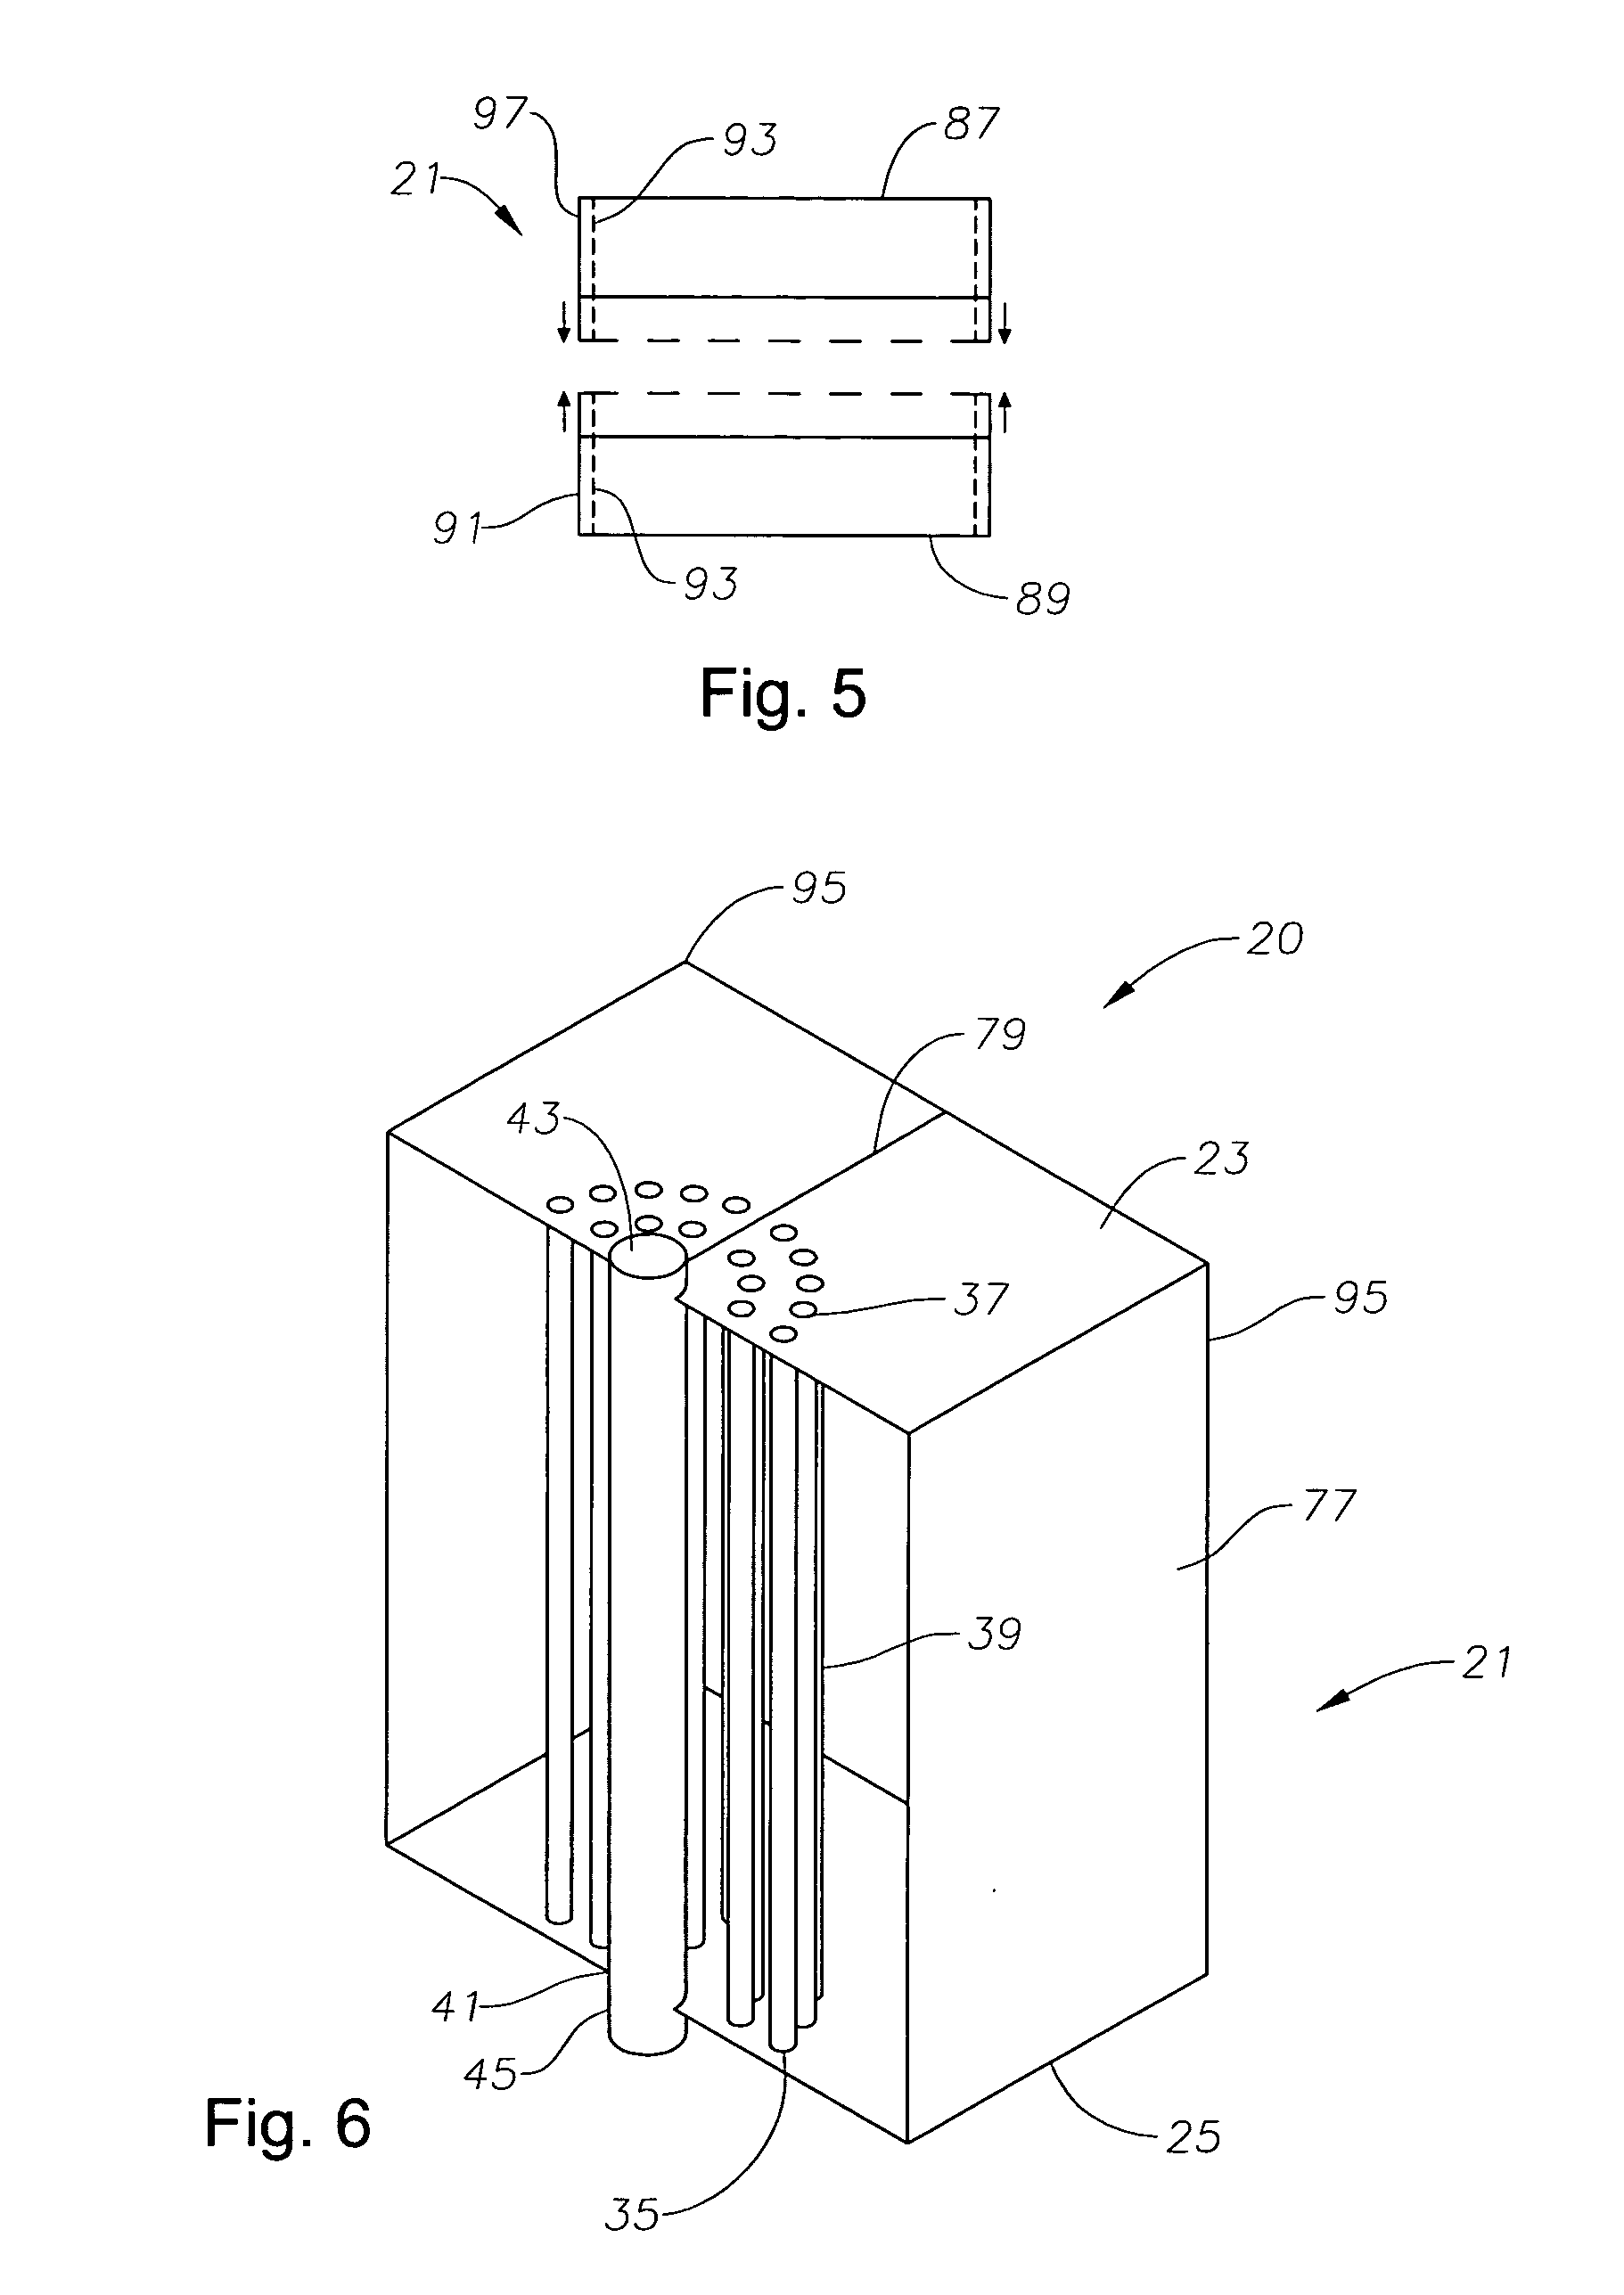 Apparatus and method of constructing offshore platforms